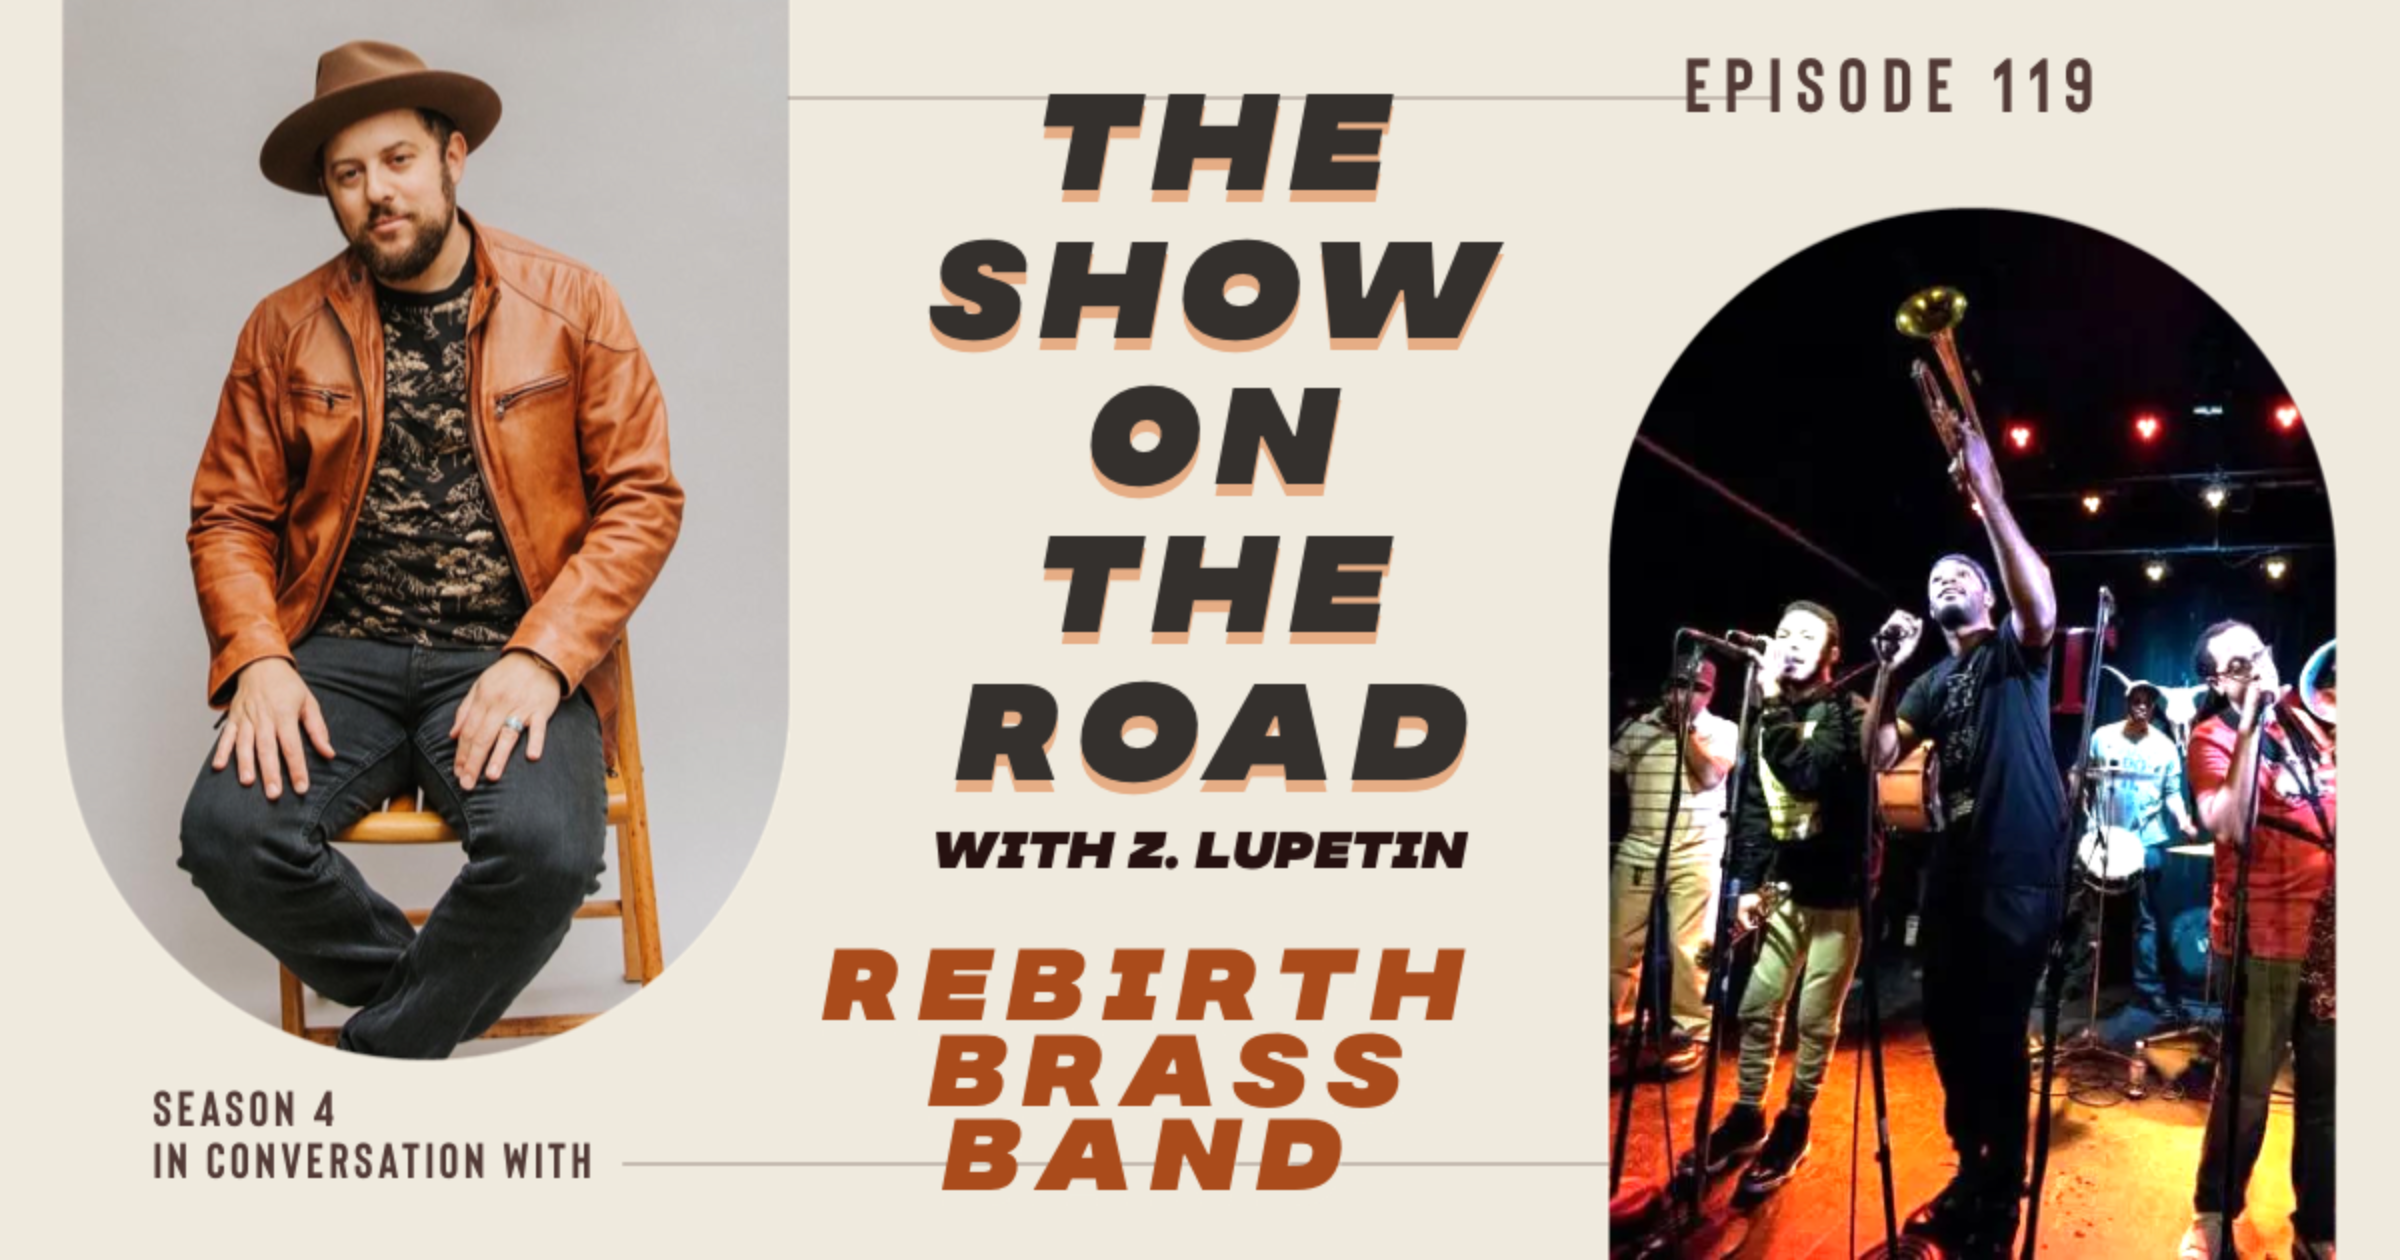 The Show On The Road - Rebirth Brass Band